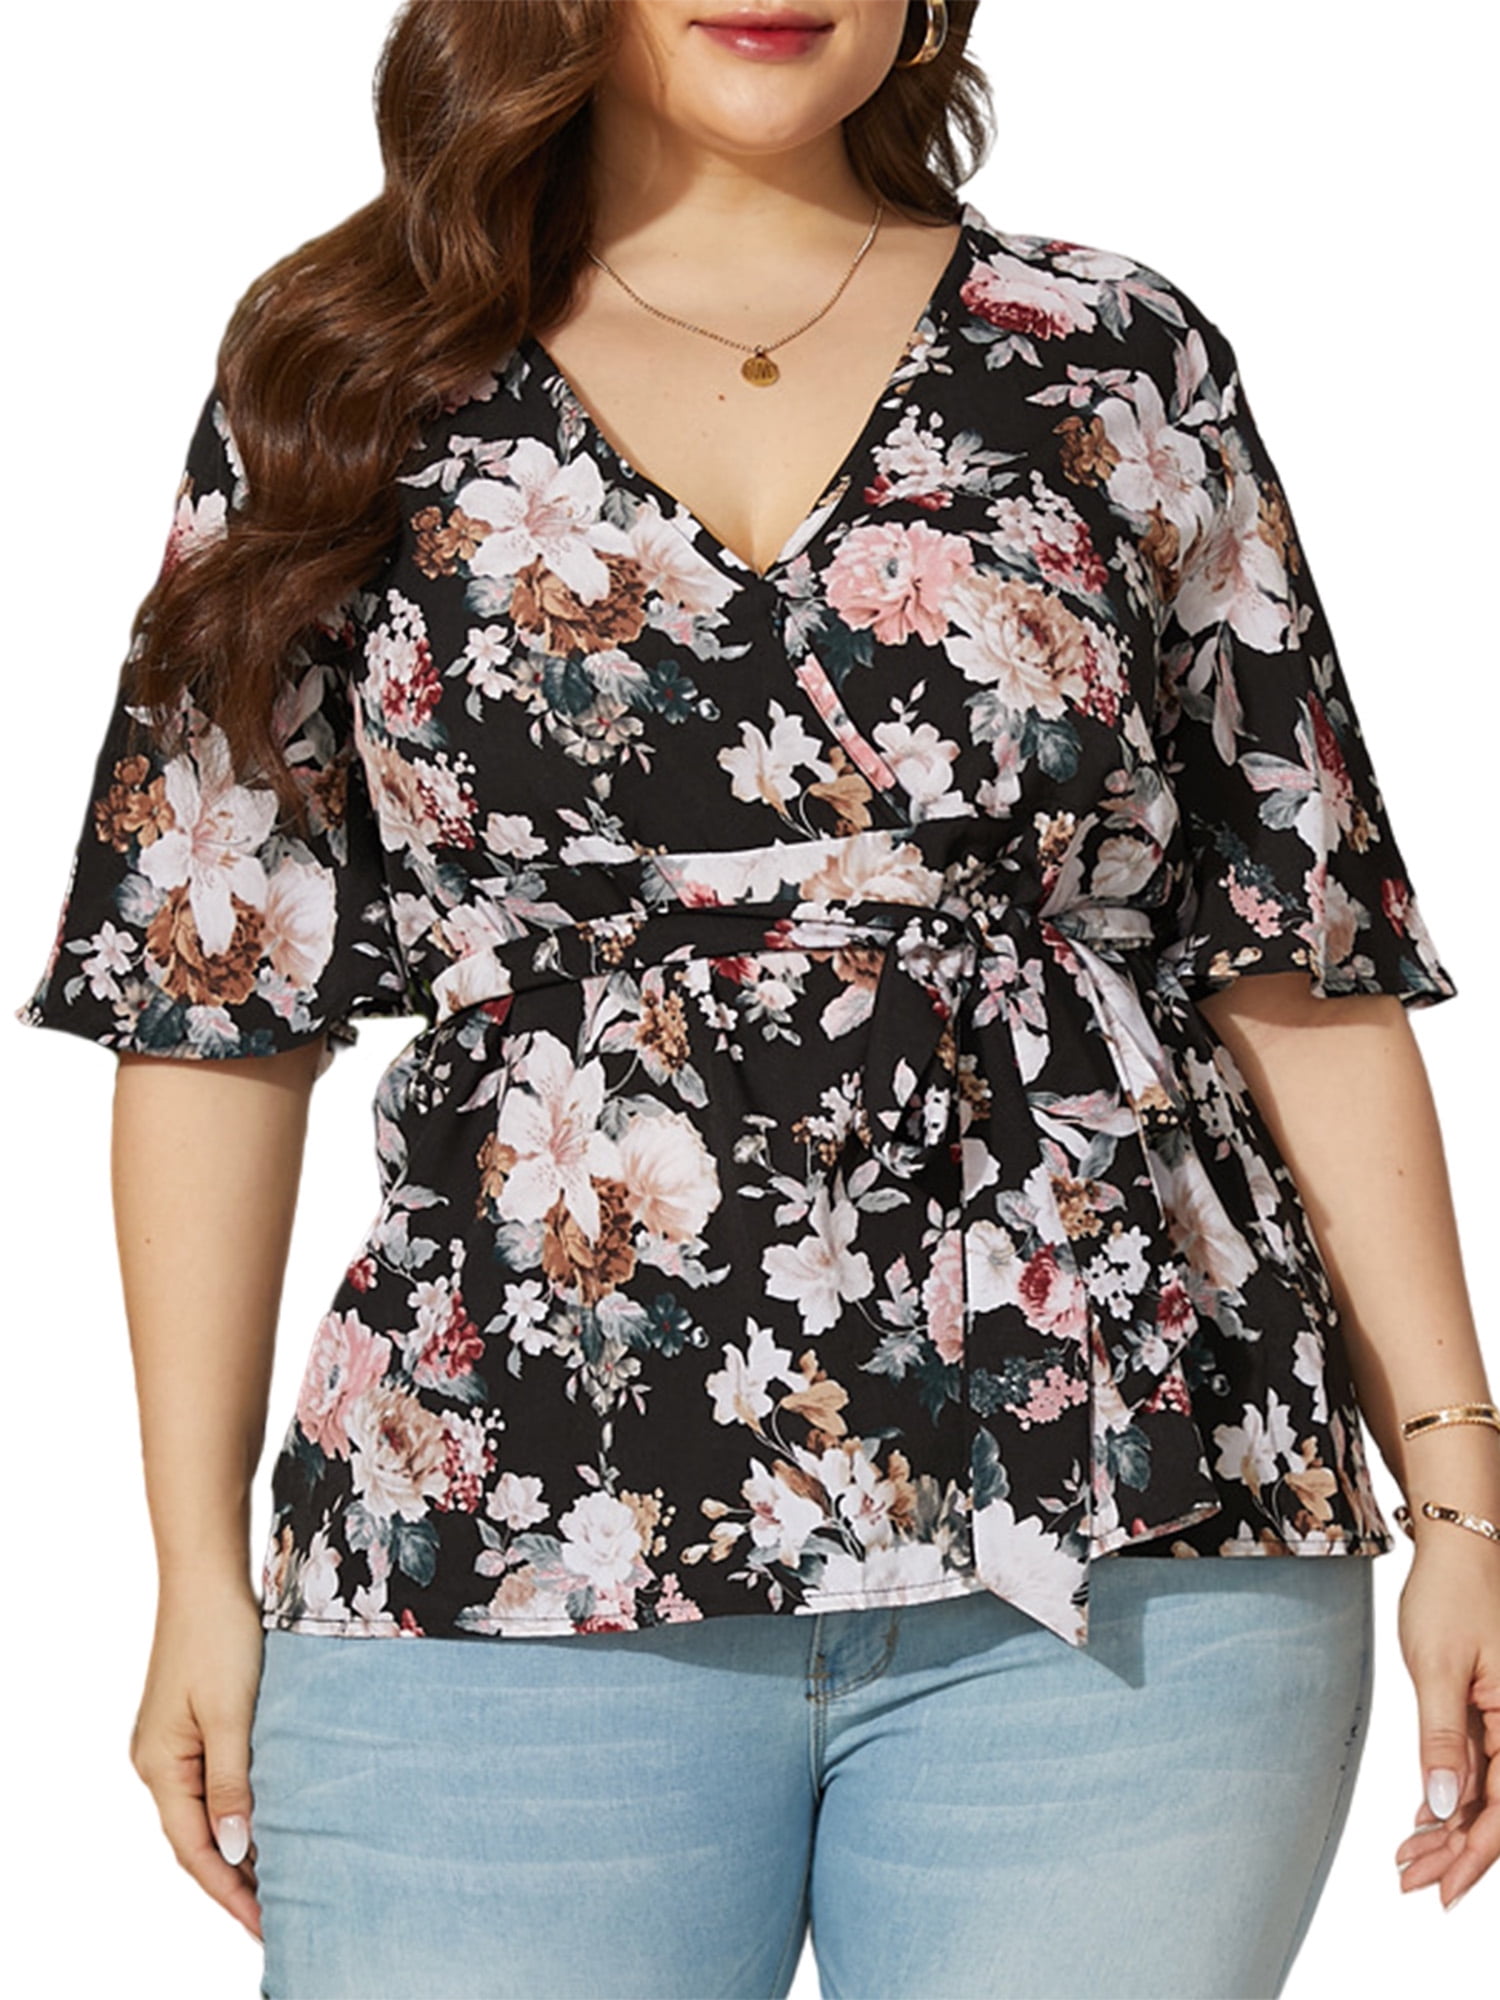 Plus Size Tops for Women Loose Summer T Shirts Fashion Floral Print Blouse Casual Short Sleeve V Neck Tunic Tops 